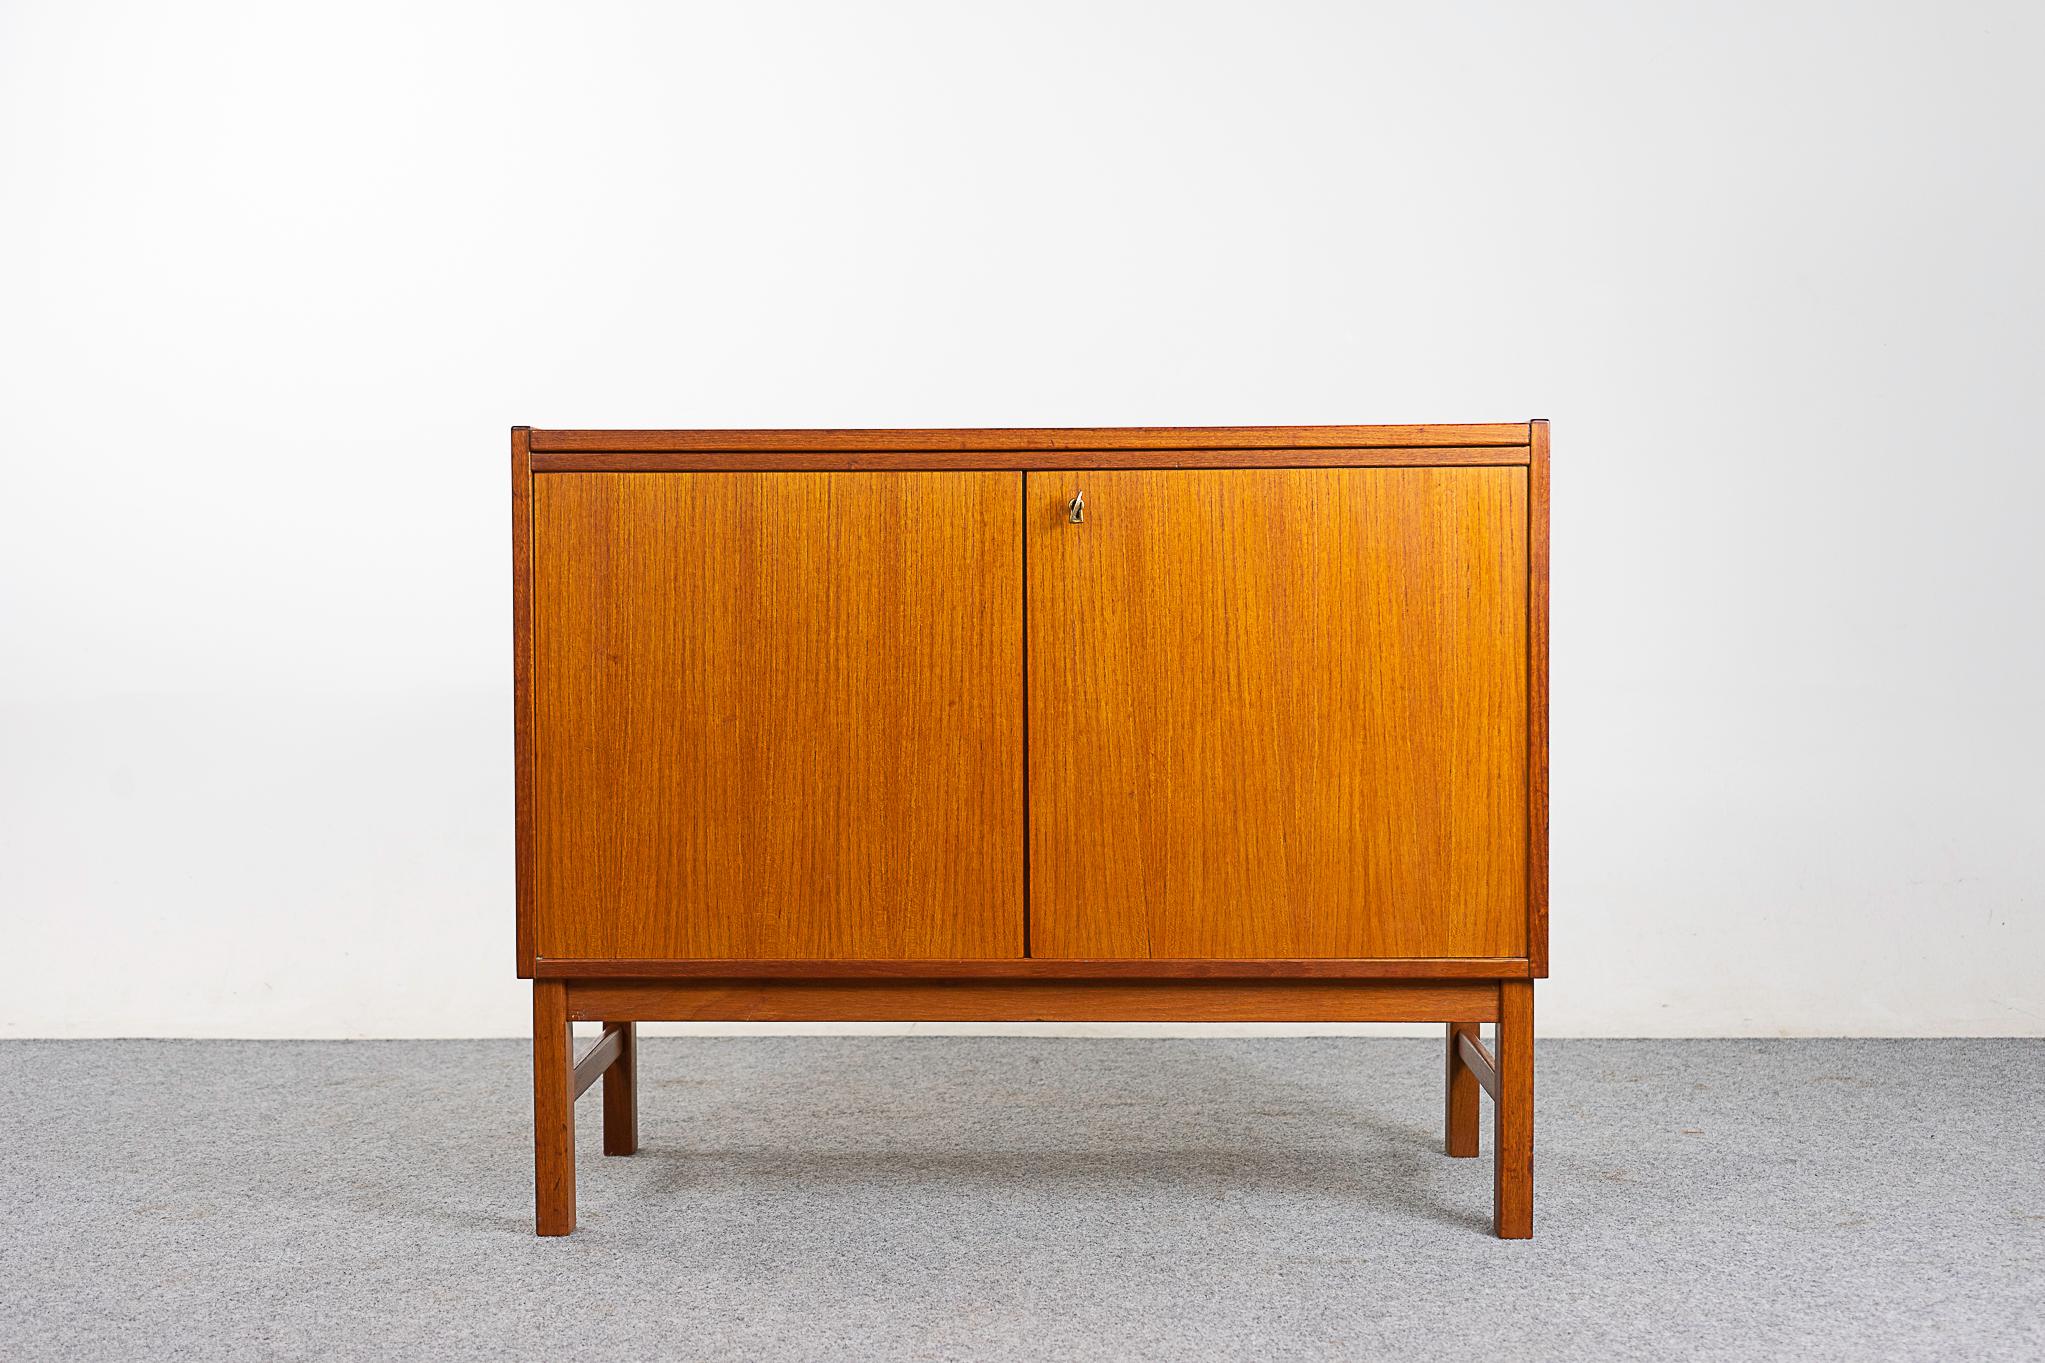 Teak midcentury cabinet, circa 1960s. Sleek, clean, simple lined design highlights the exceptional book-matched veneer throughout. Locking low profile cabinet with adjustable shelf, a perfect condo sized storage solution.

Unrestored item, some